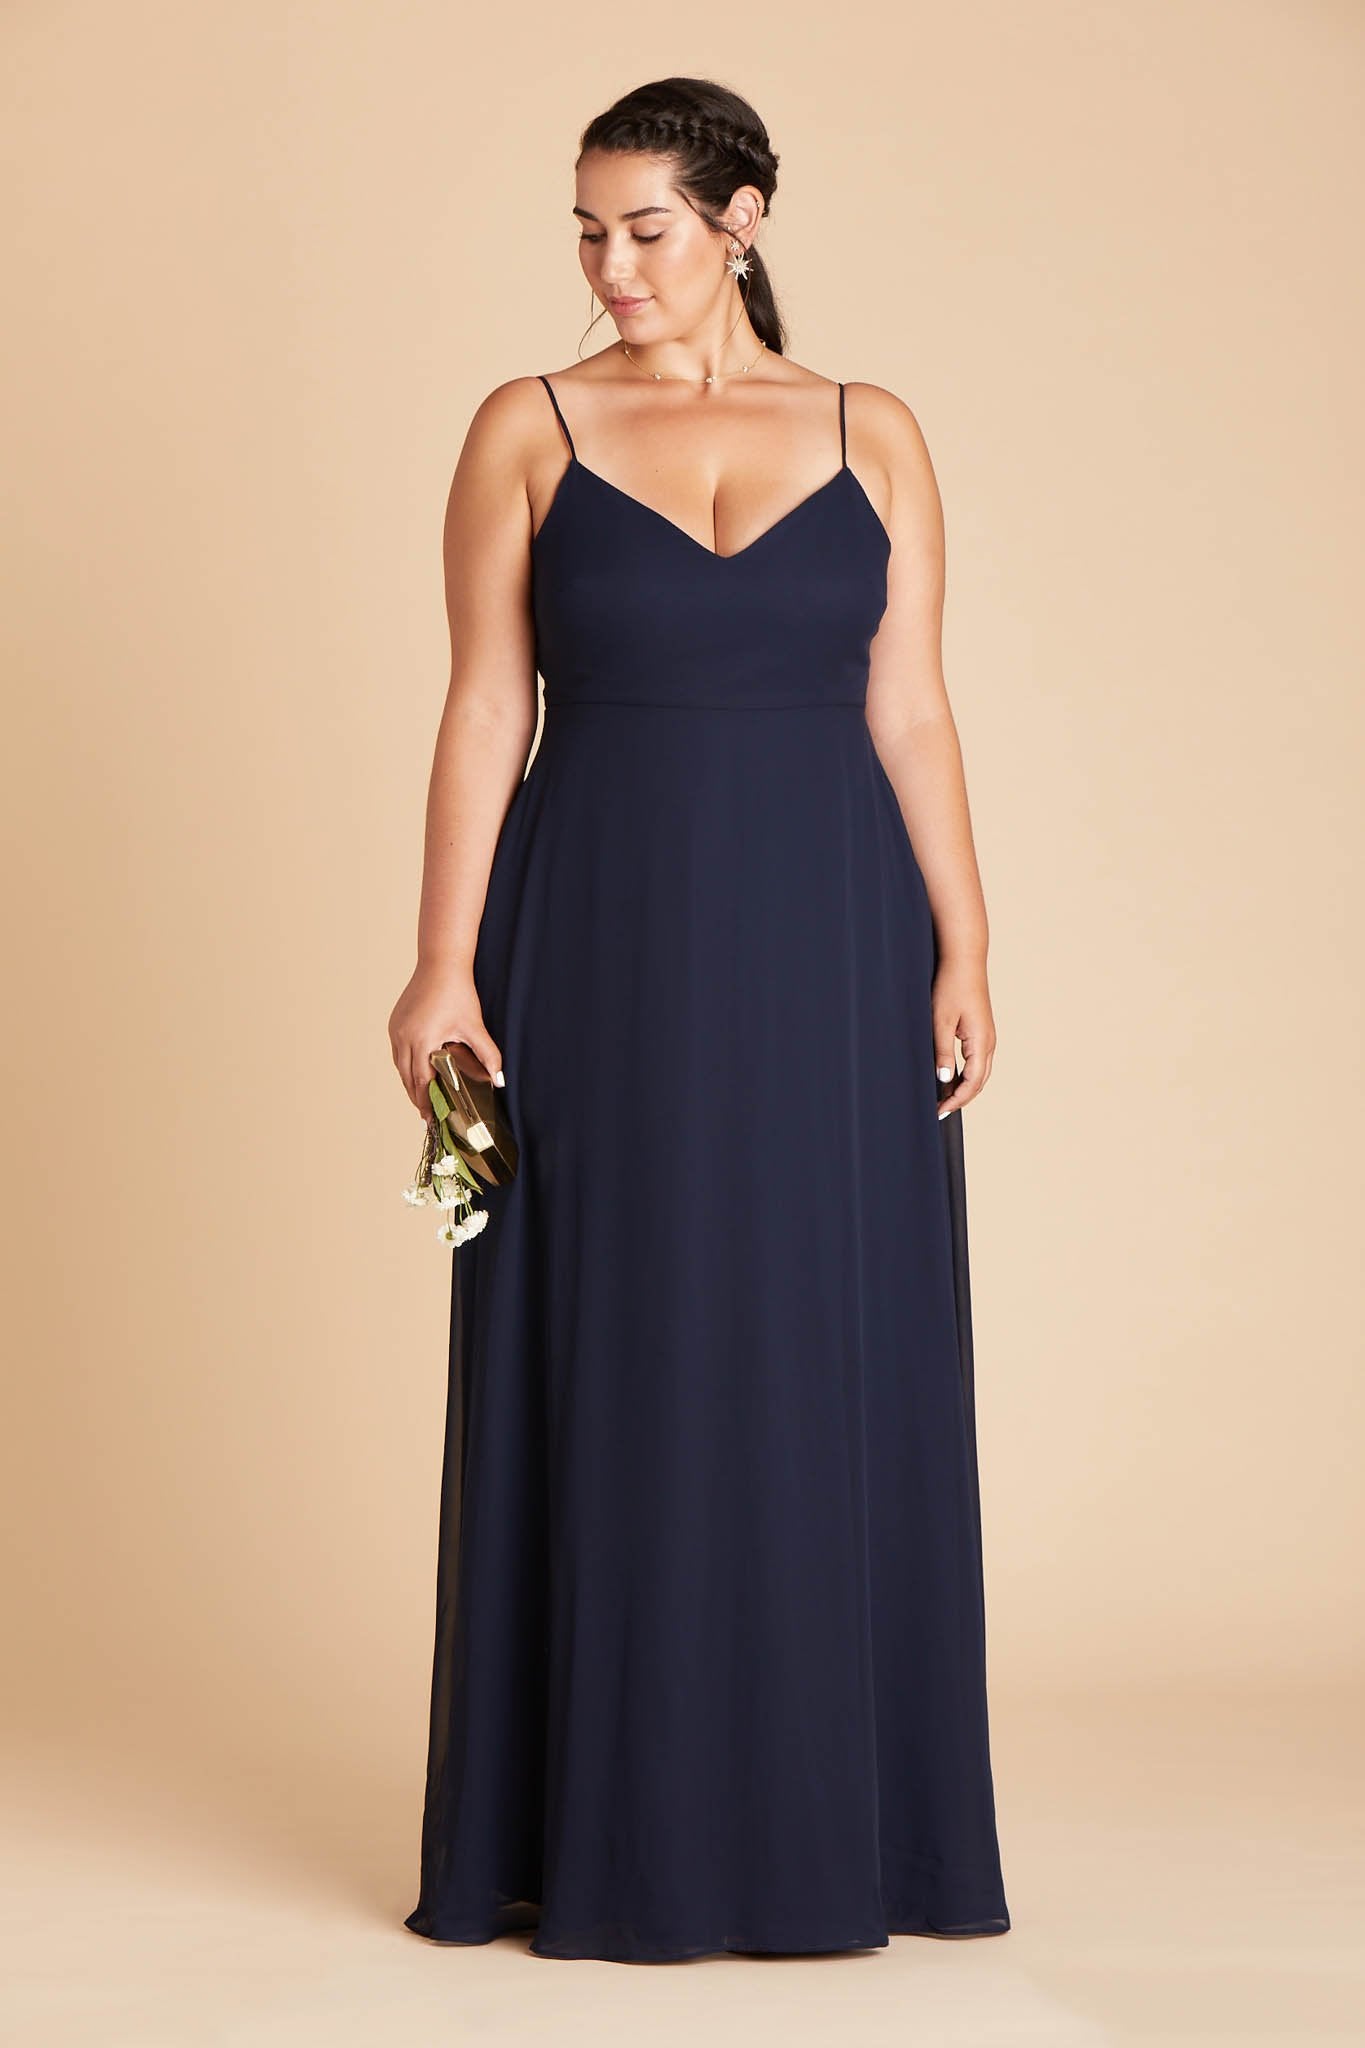 Devin convertible plus size bridesmaids dress in navy blue chiffon by Birdy Grey, front view